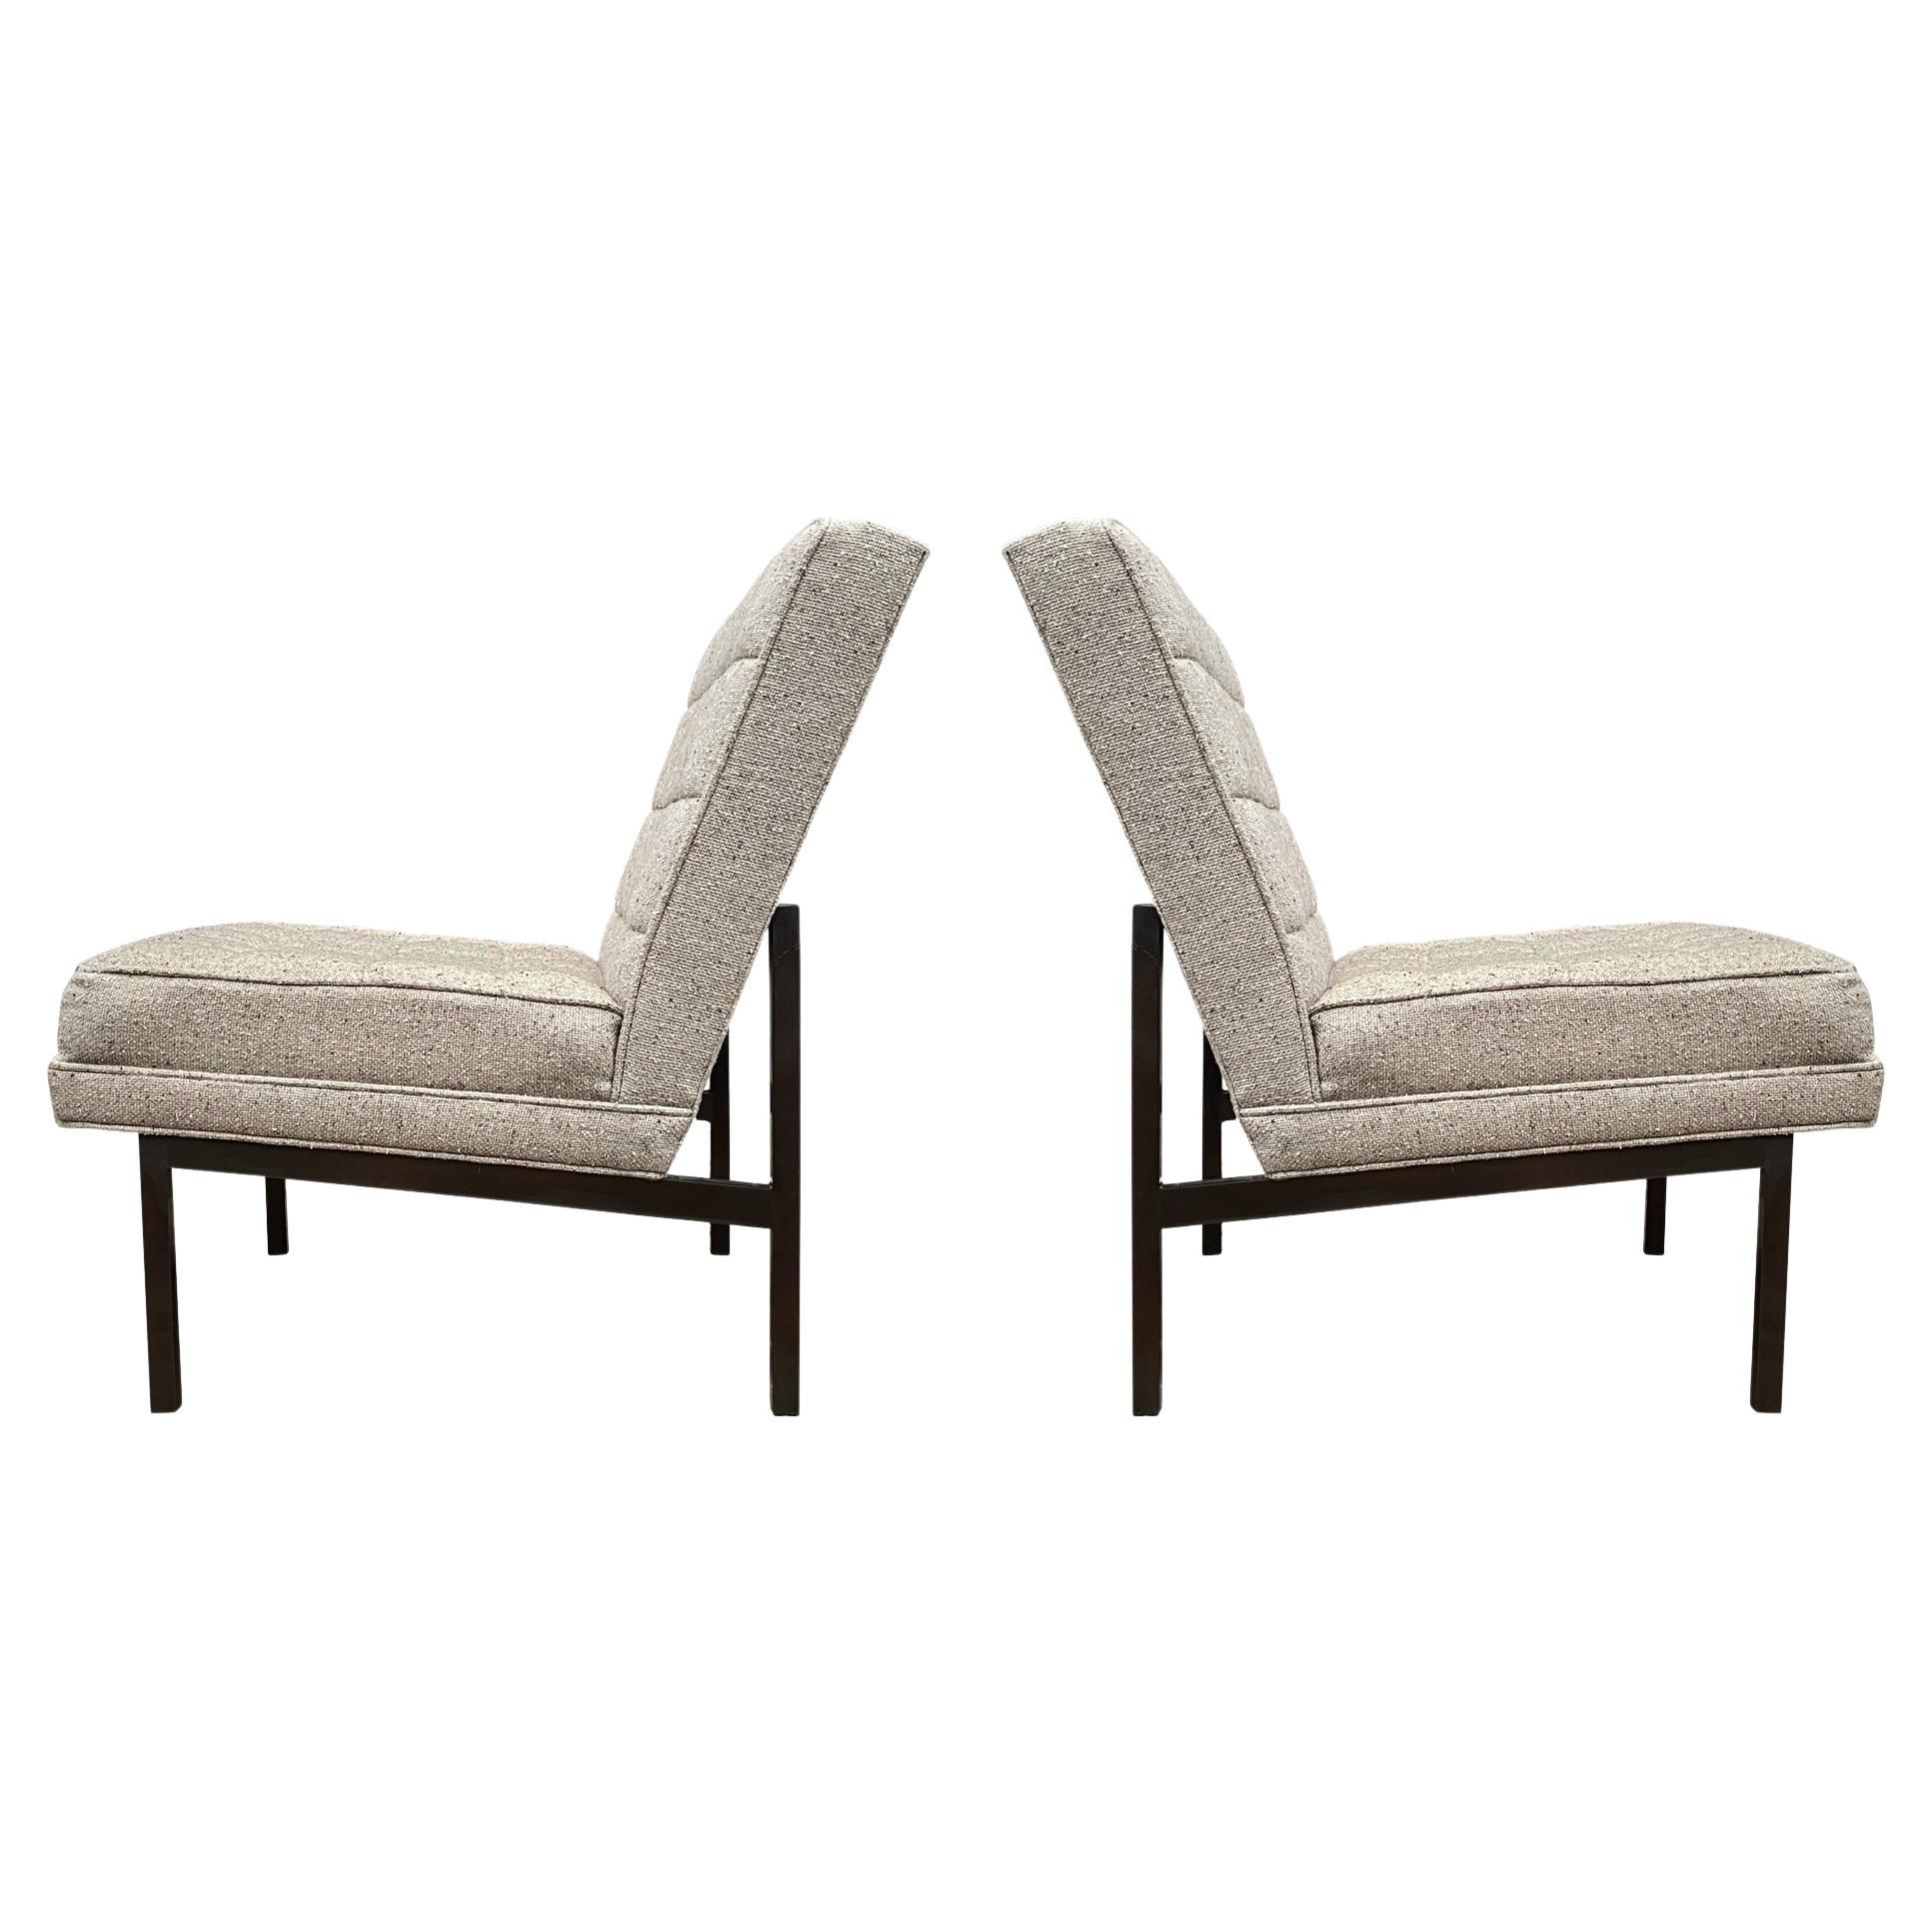 Mid-Century Modern Slipper Lounge Chairs in Grey Tweed with Bronze Frames